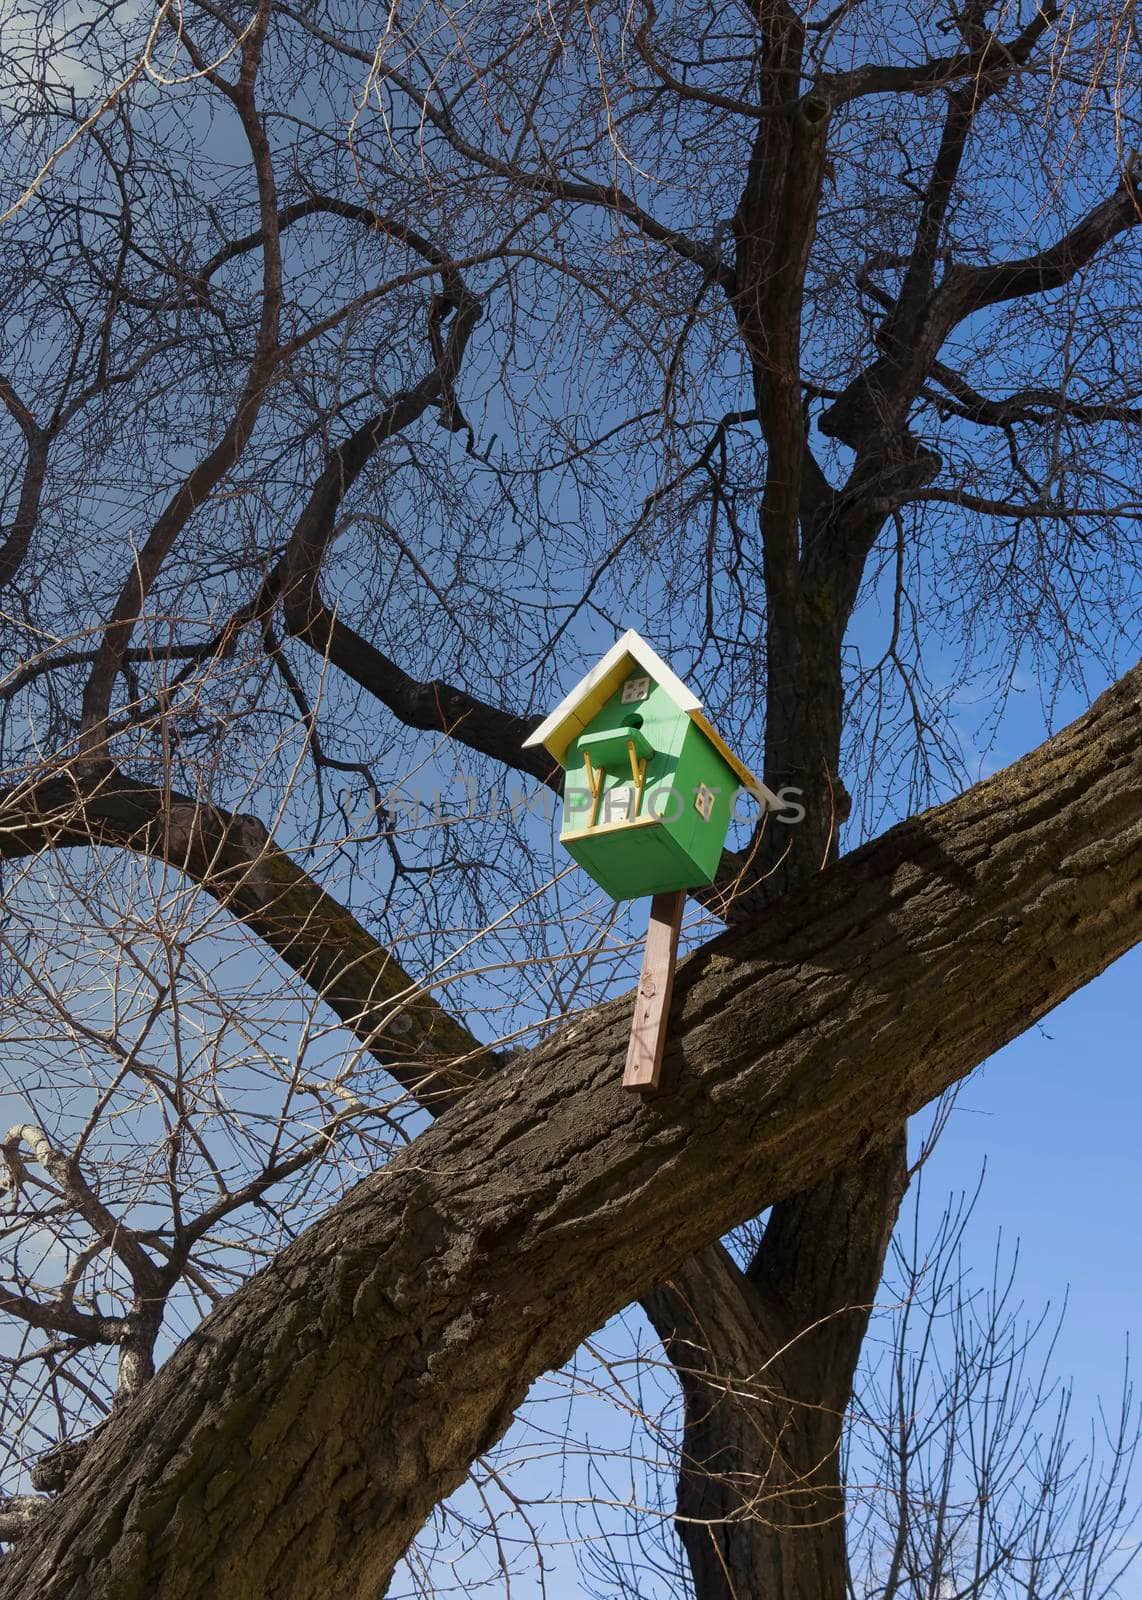 Urban landscape with bird houses on the background of trees without leaves.